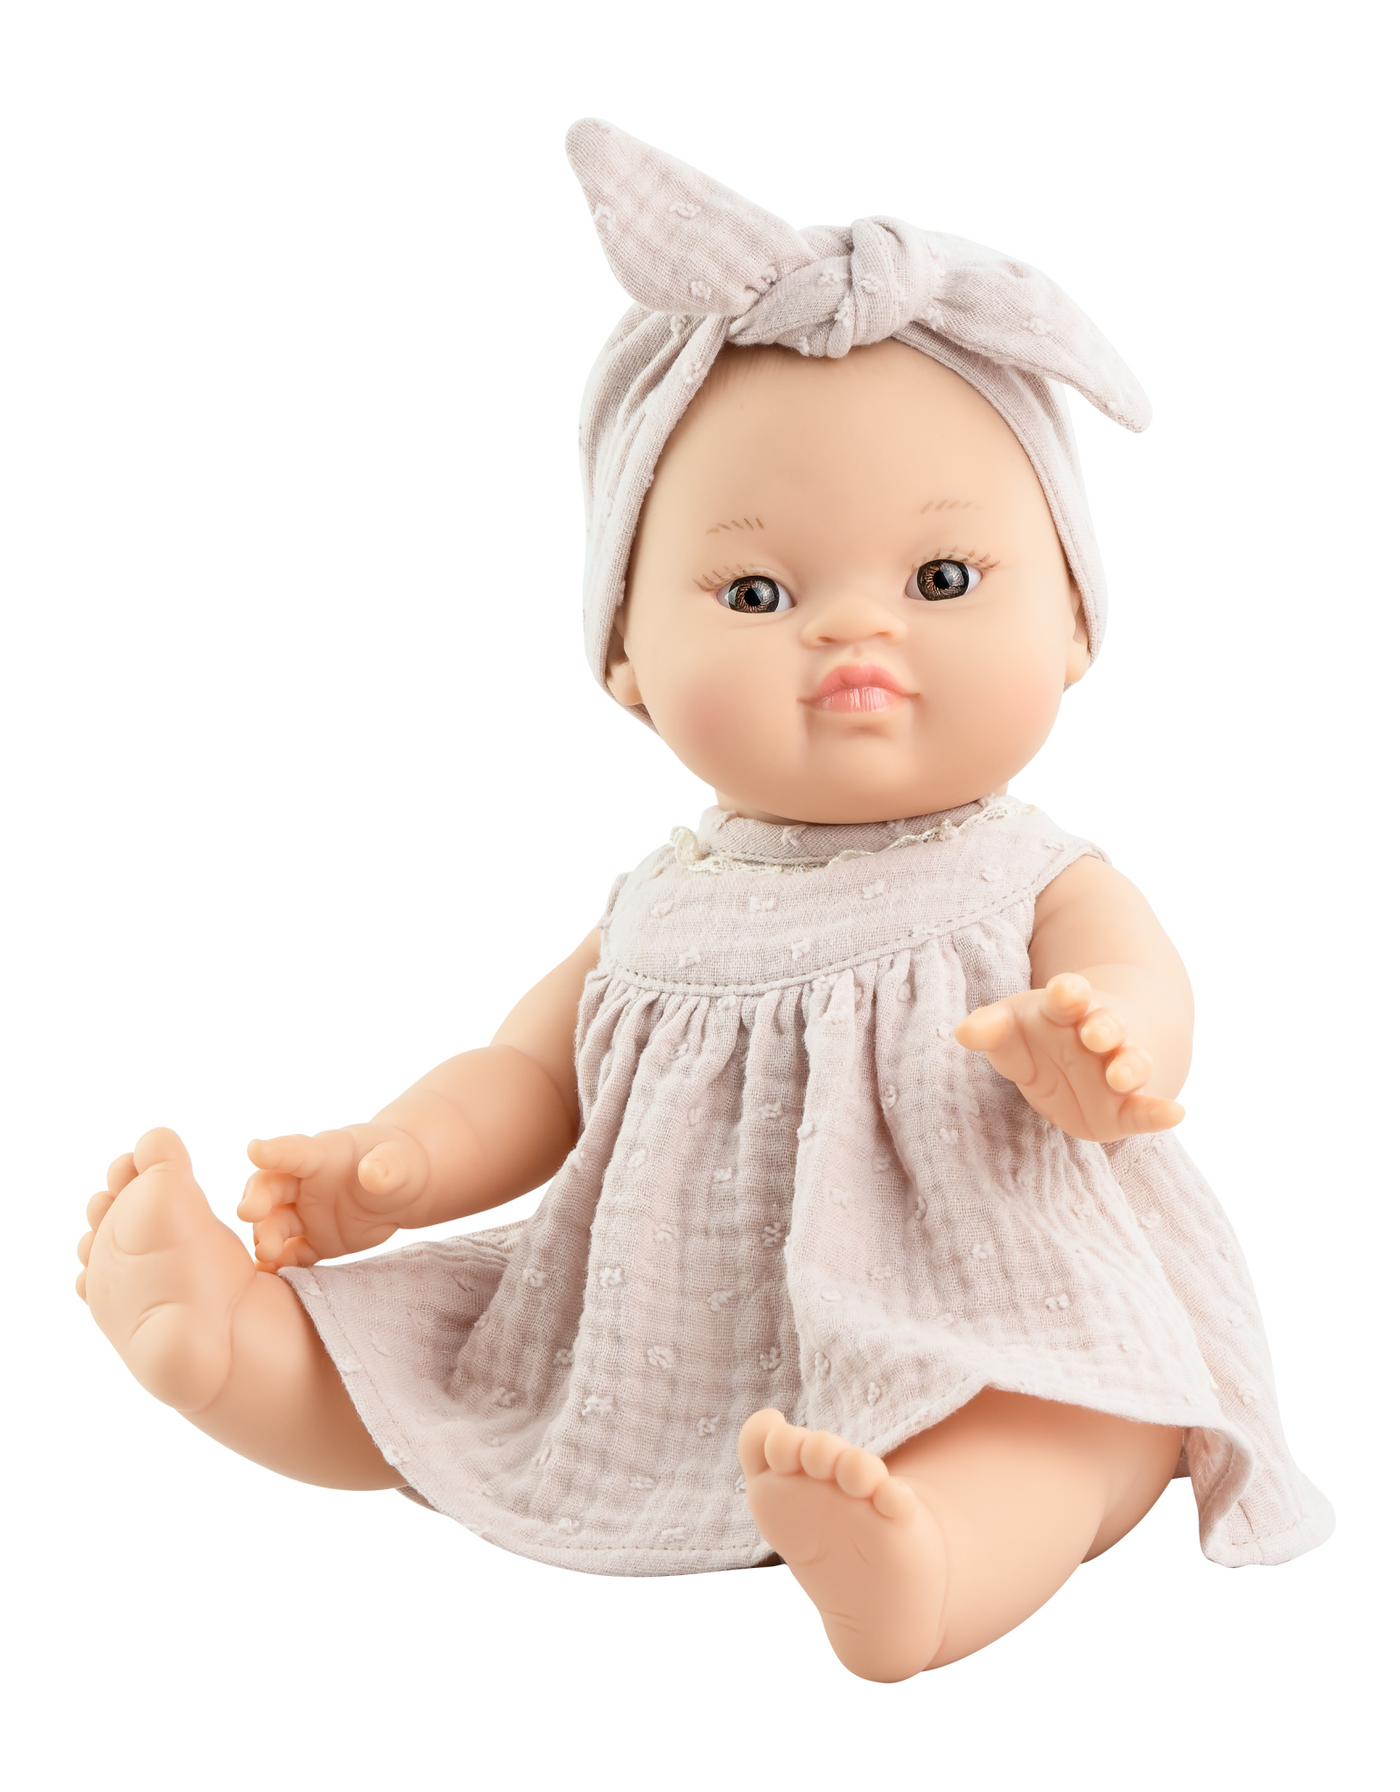 Baby Gordis - Lily with linen dress - Paola Reina